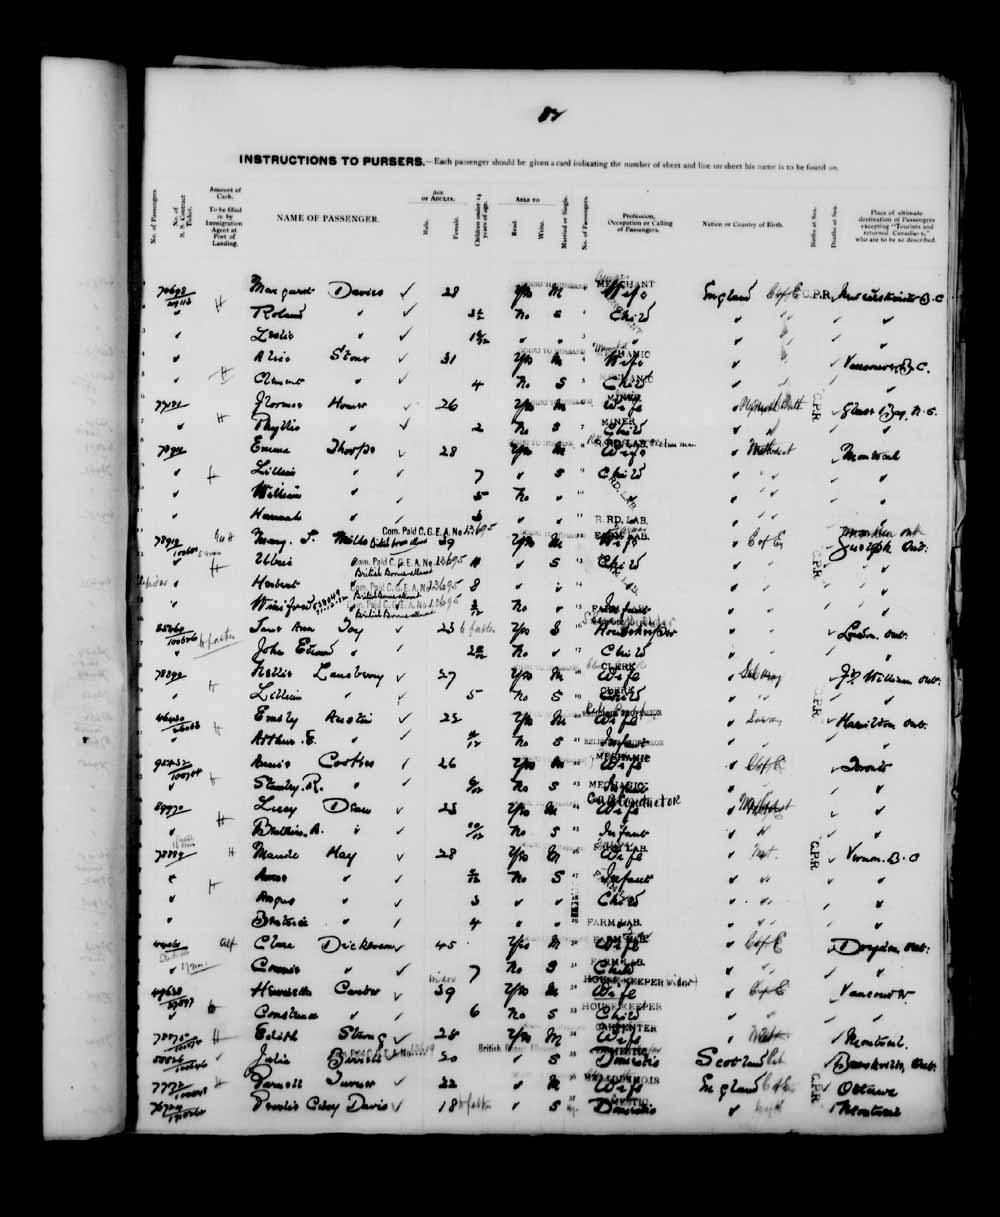 Digitized page of Quebec Passenger Lists for Image No.: e003591262